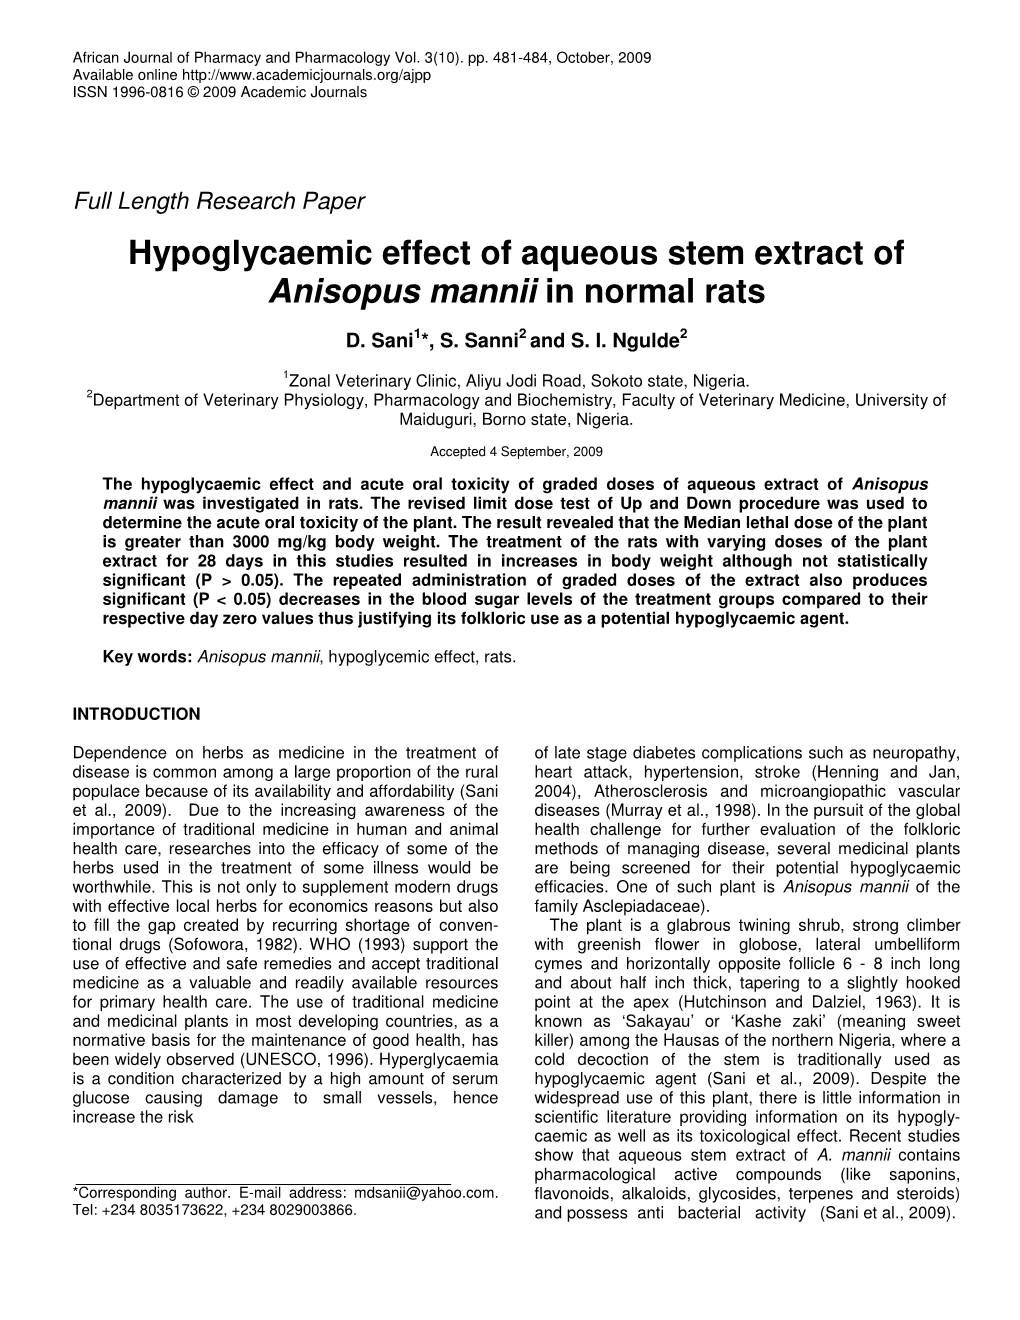 Hypoglycaemic Effect of Aqueous Stem Extract of Anisopus Mannii in Normal Rats